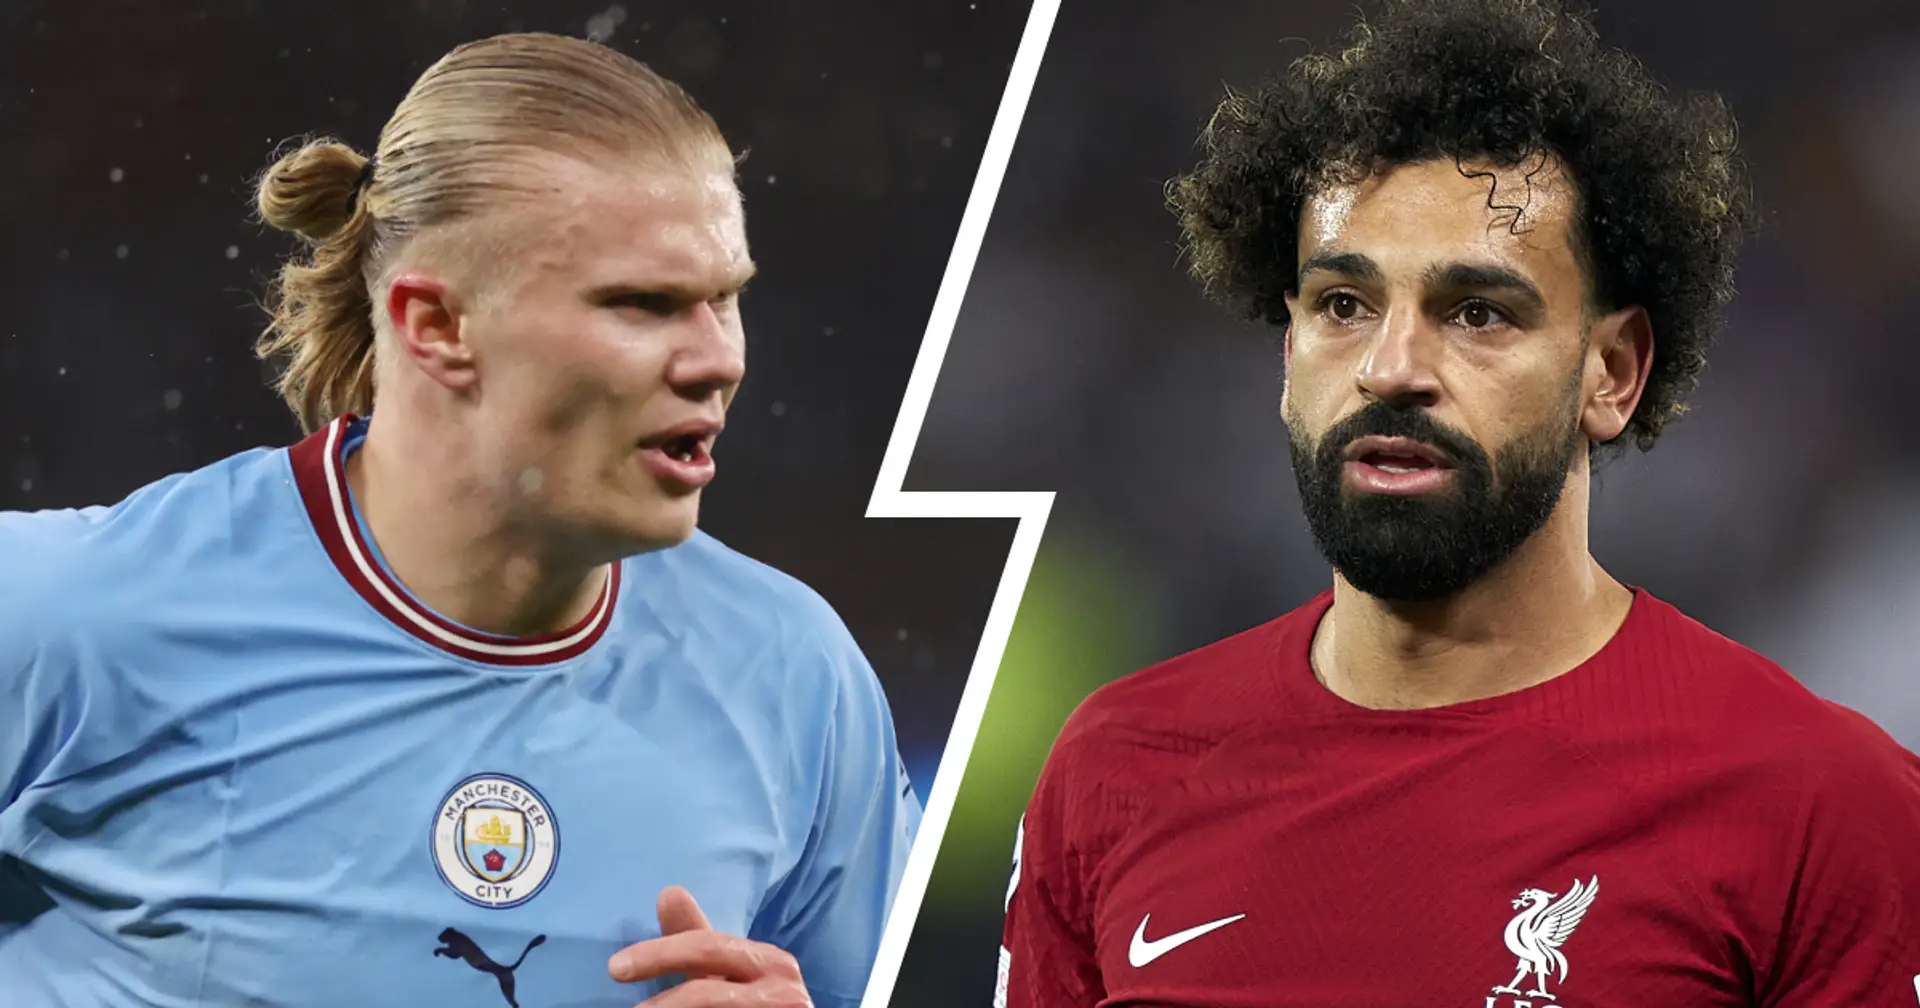 Erling Haaland equals Mo Salah's Premier League record for goals scored in one season